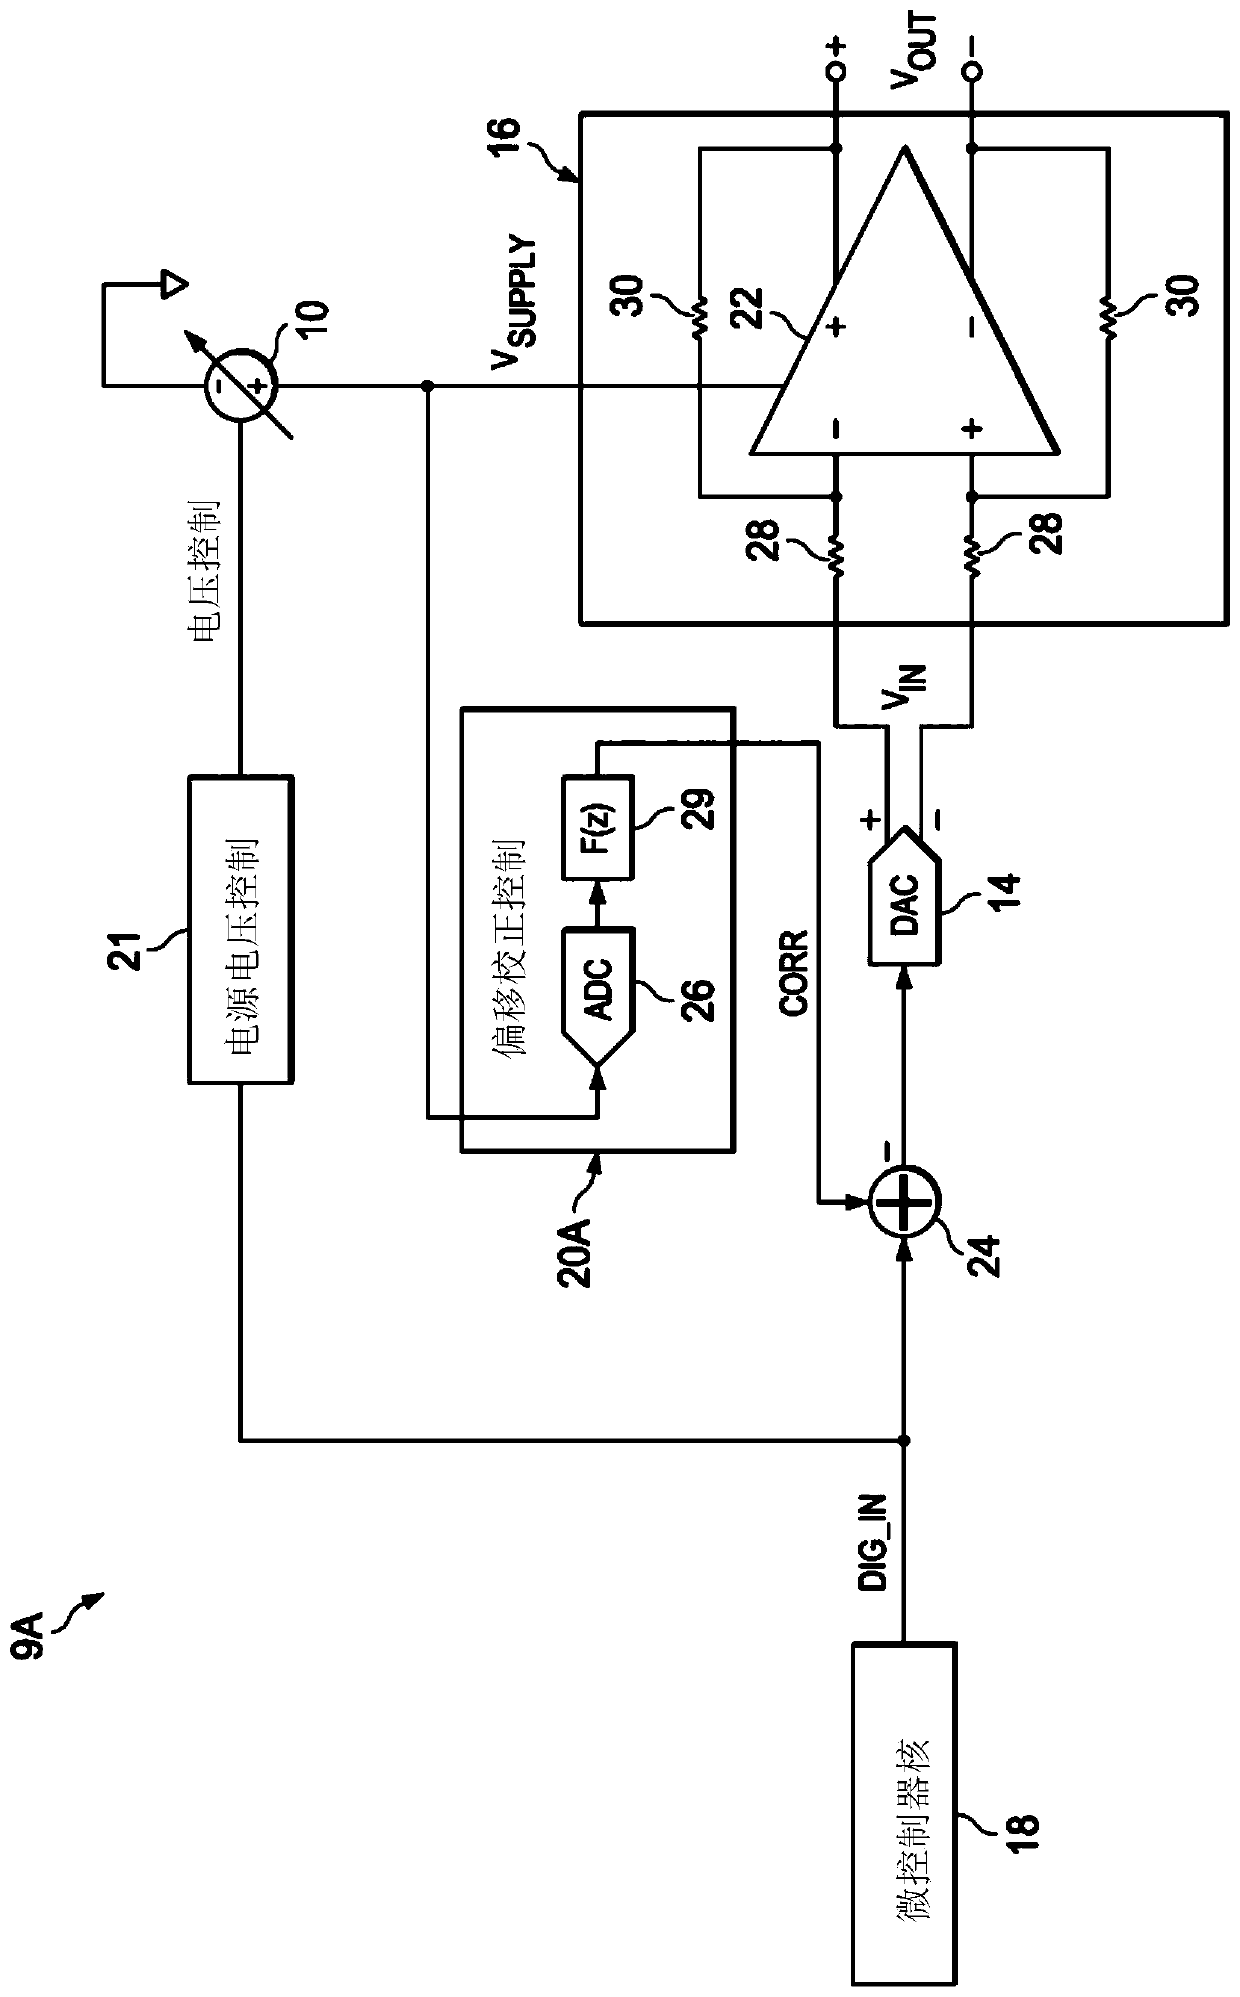 Amplifier offset cancellation using amplifier supply voltage